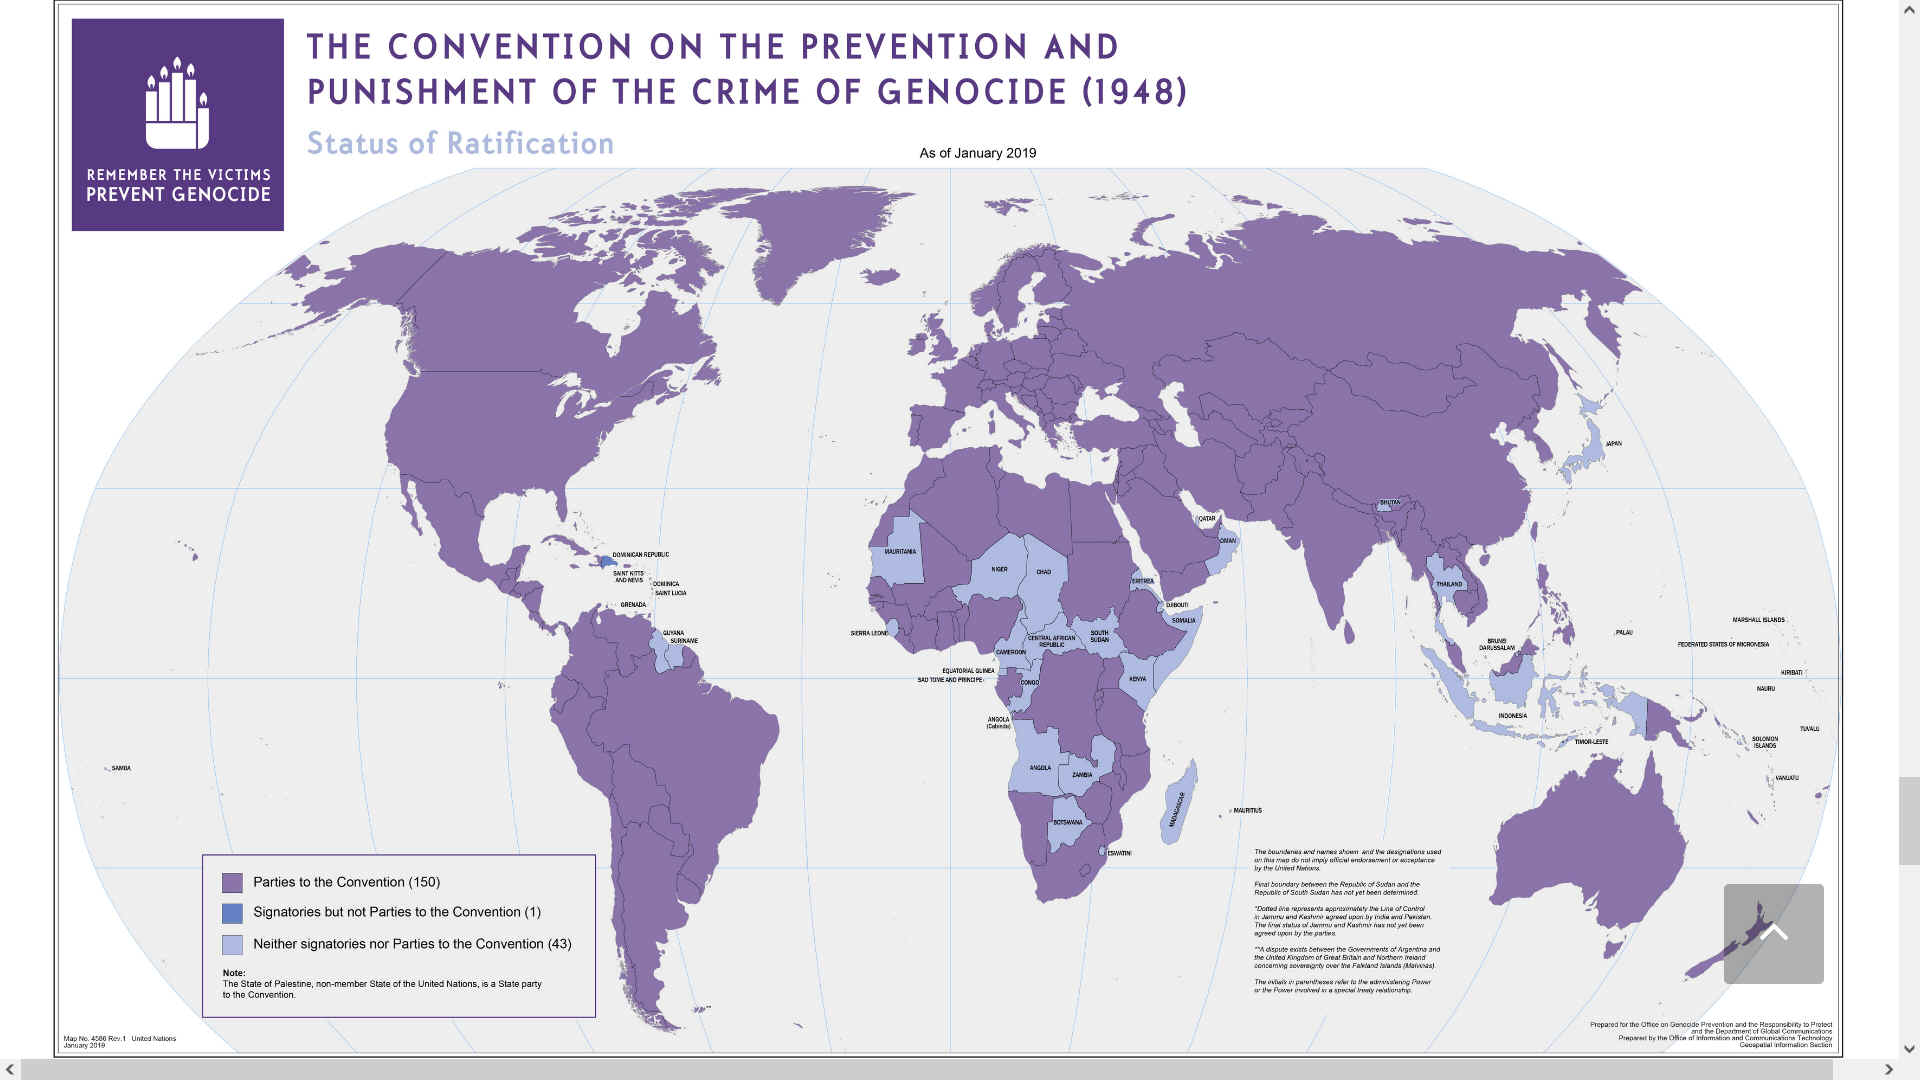 GENOCIDE CONVENTION ON THE PREVENTION OF THE CRIME OF 1948